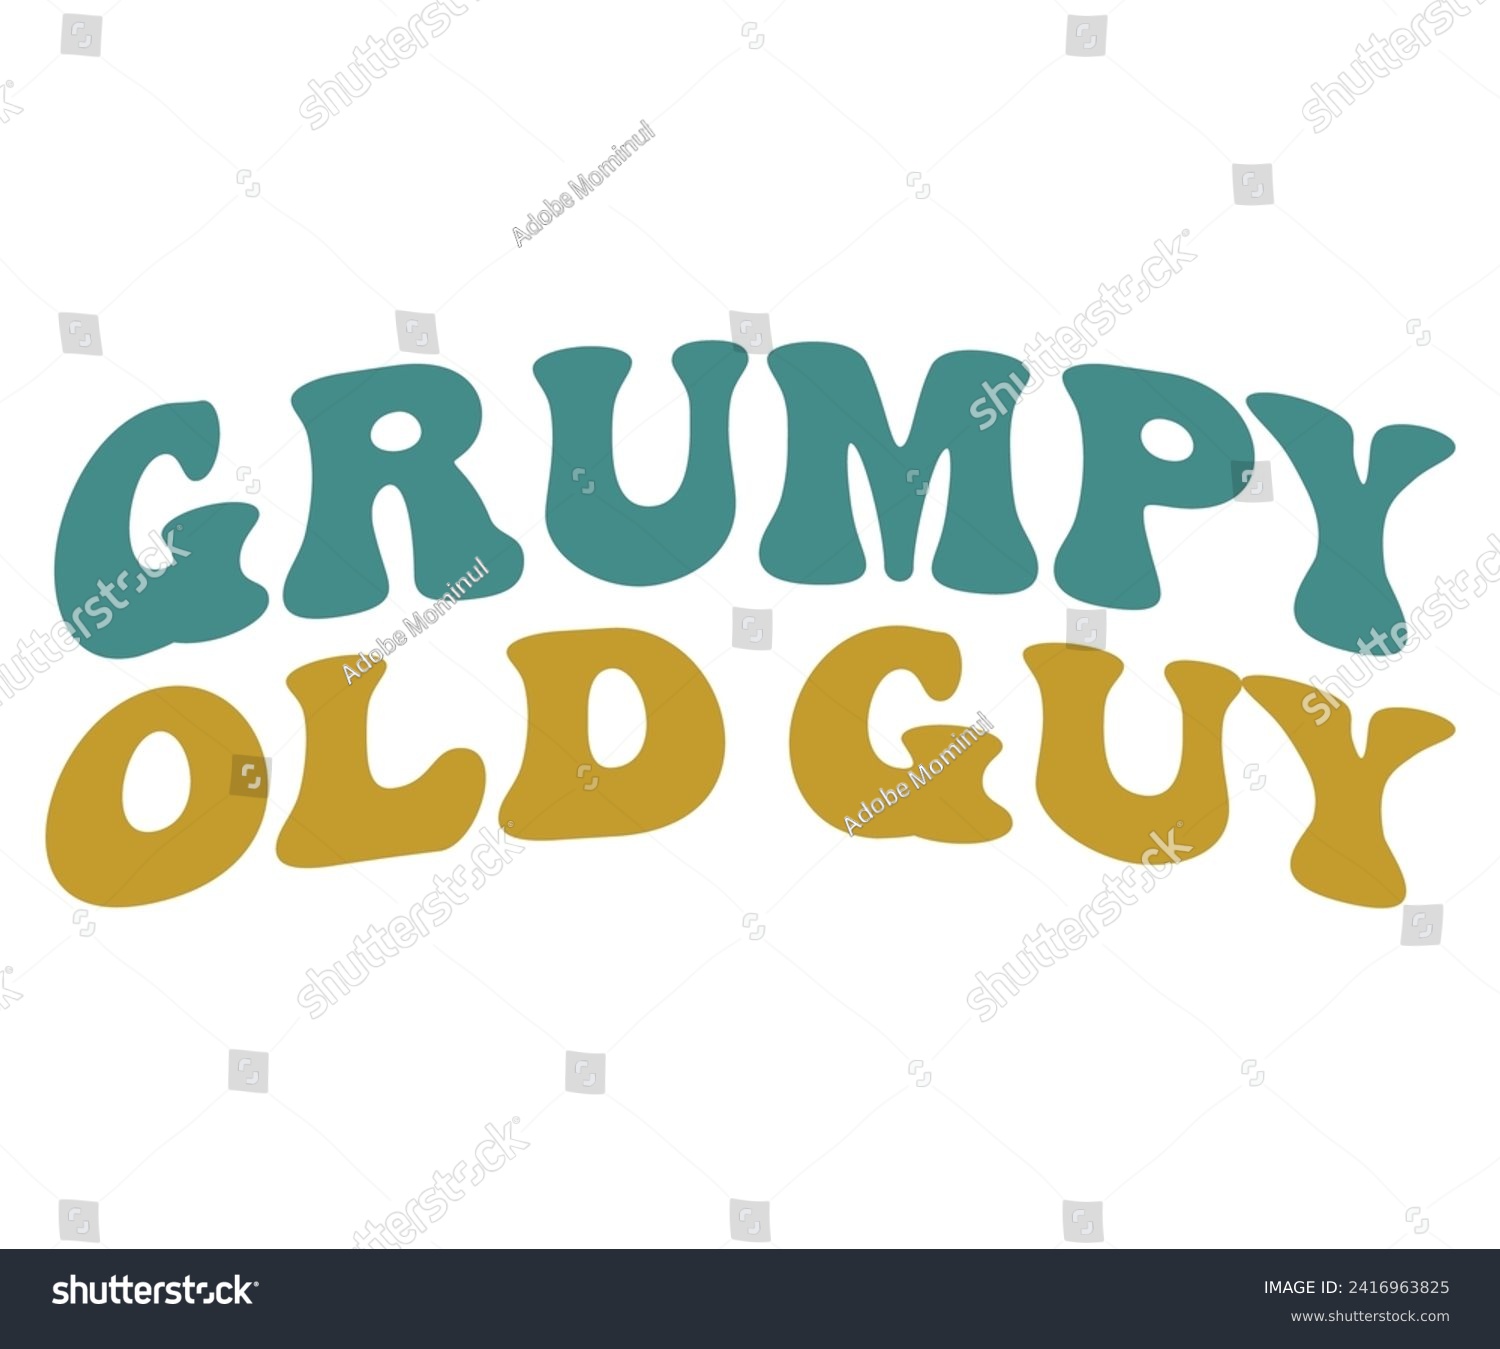 SVG of Grumpy Old Guy Svg,Father's Day Svg,Papa svg,Grandpa Svg,Father's Day Saying Qoutes,Dad Svg,Funny Father, Gift For Dad Svg,Daddy Svg,Family Svg,T shirt Design,Svg Cut File,Typography svg